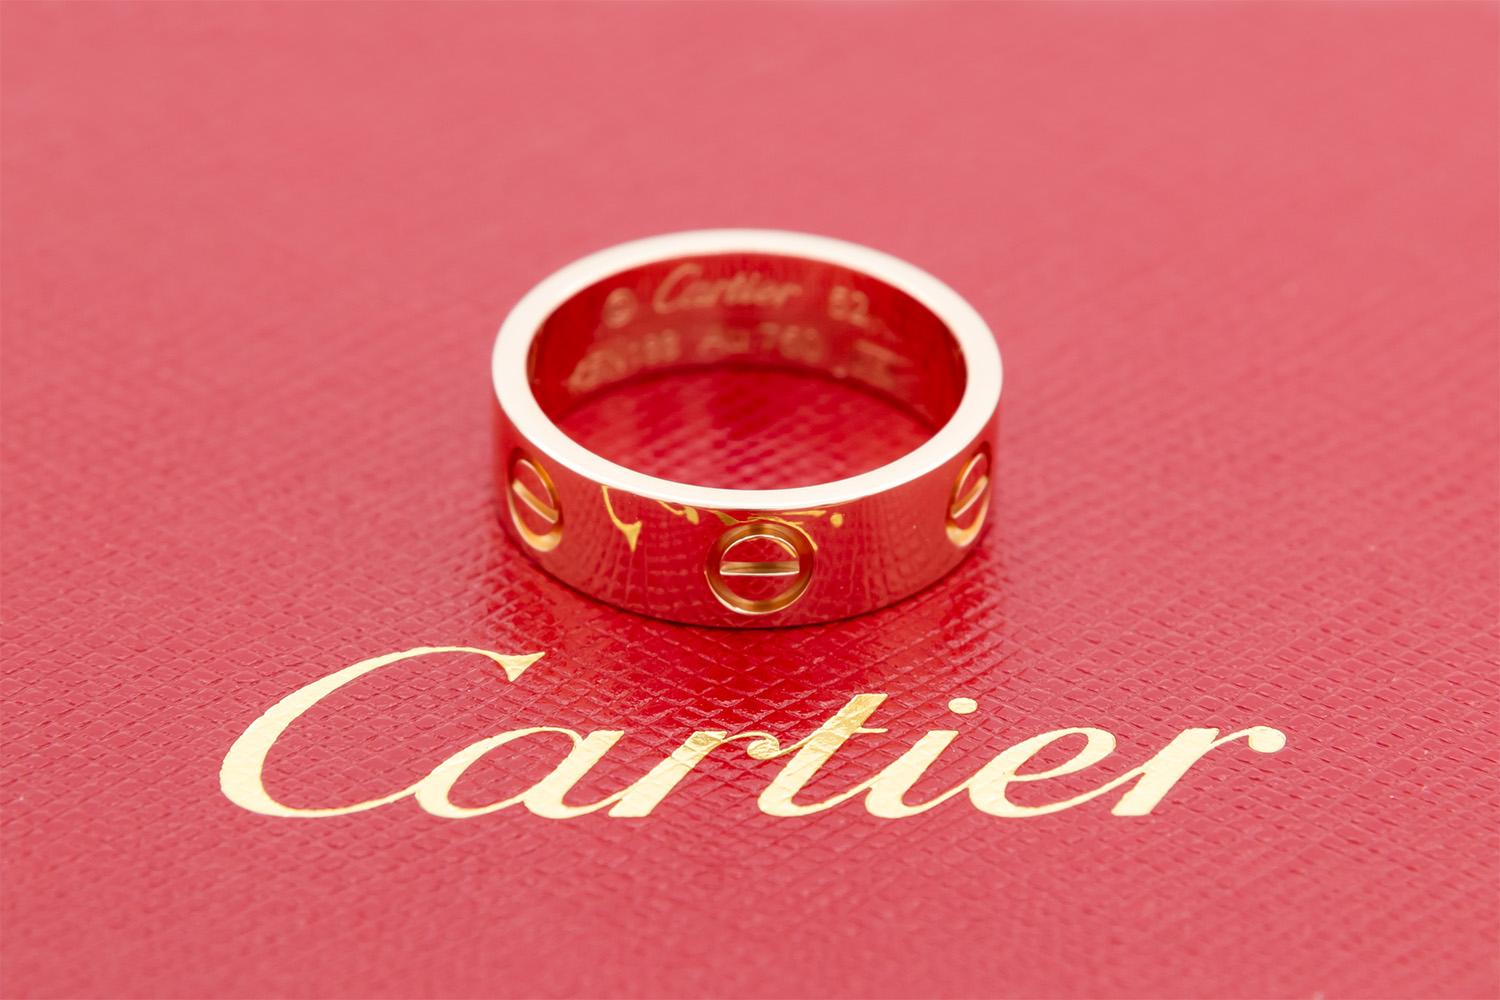 We are pleased to offer this Authentic Cartier 18K Rose Gold Love Ring. This is the 5.5mm love ring in a size 52 EU/6.25 US. It comes complete with the Original Cartier ring box, Cartier service/travel pouch and original Cartier receipt. The ring is